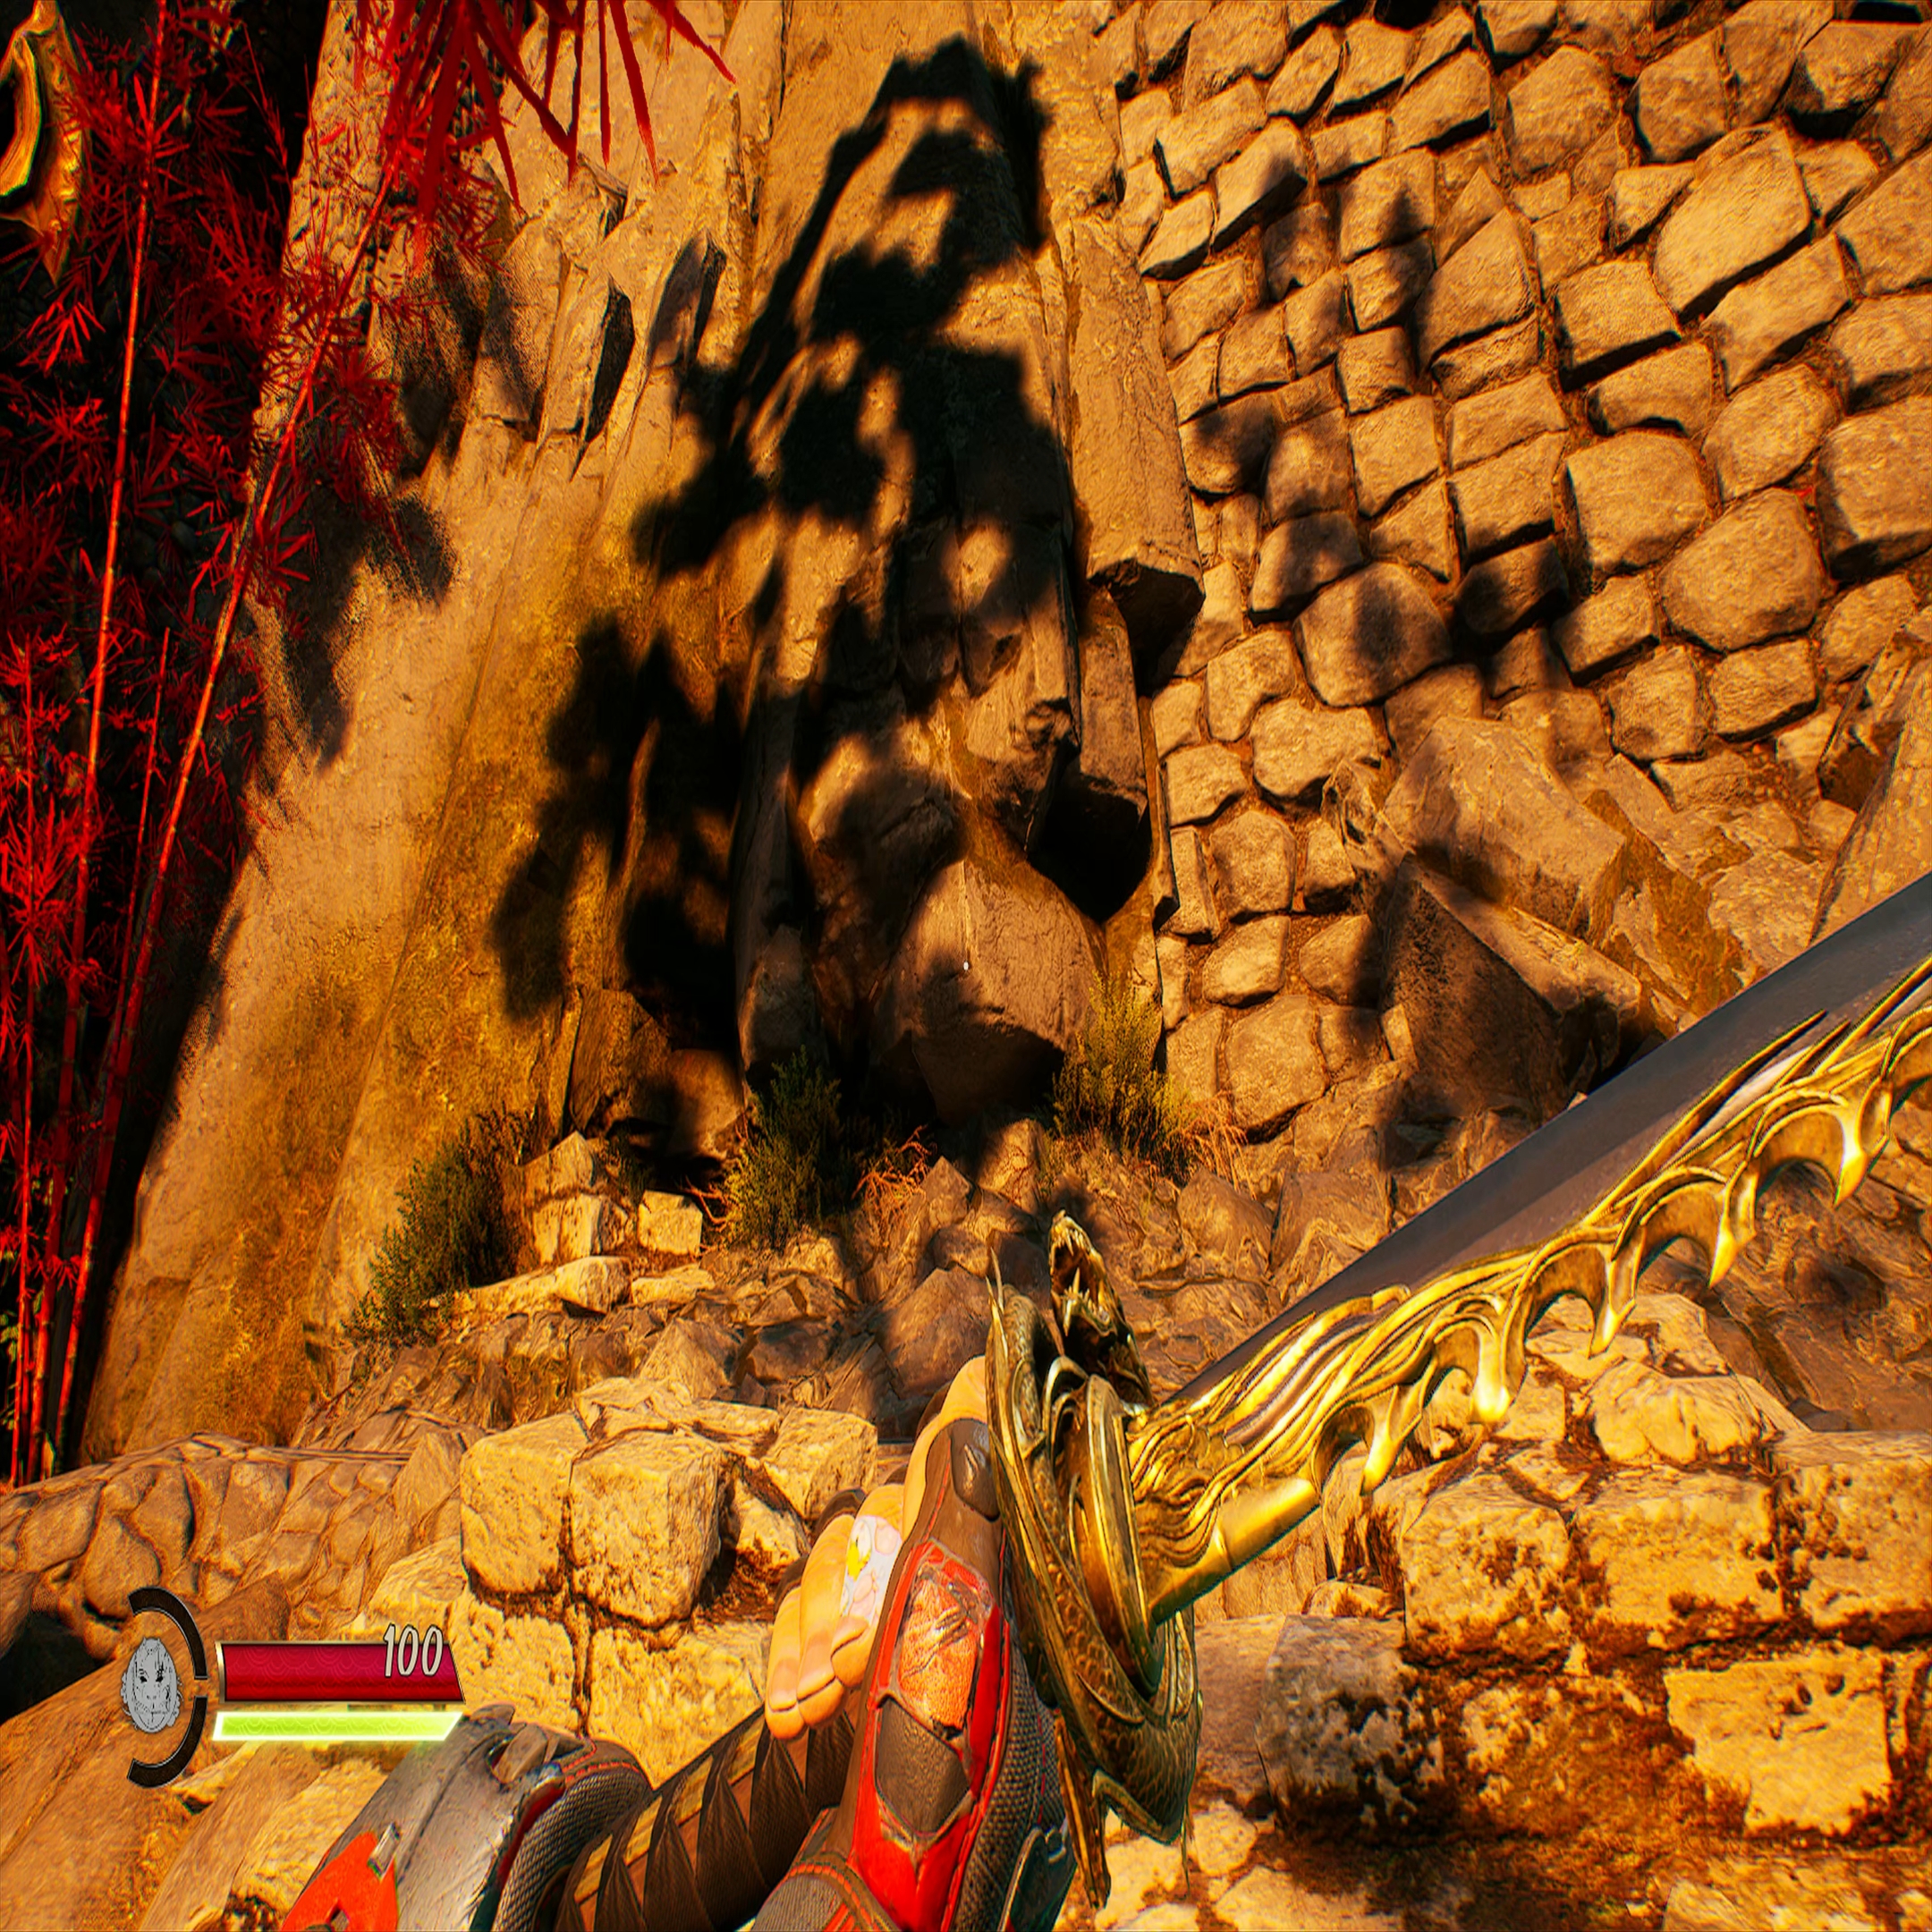 Shadow Warrior 3: a great game let down by frustrating technical